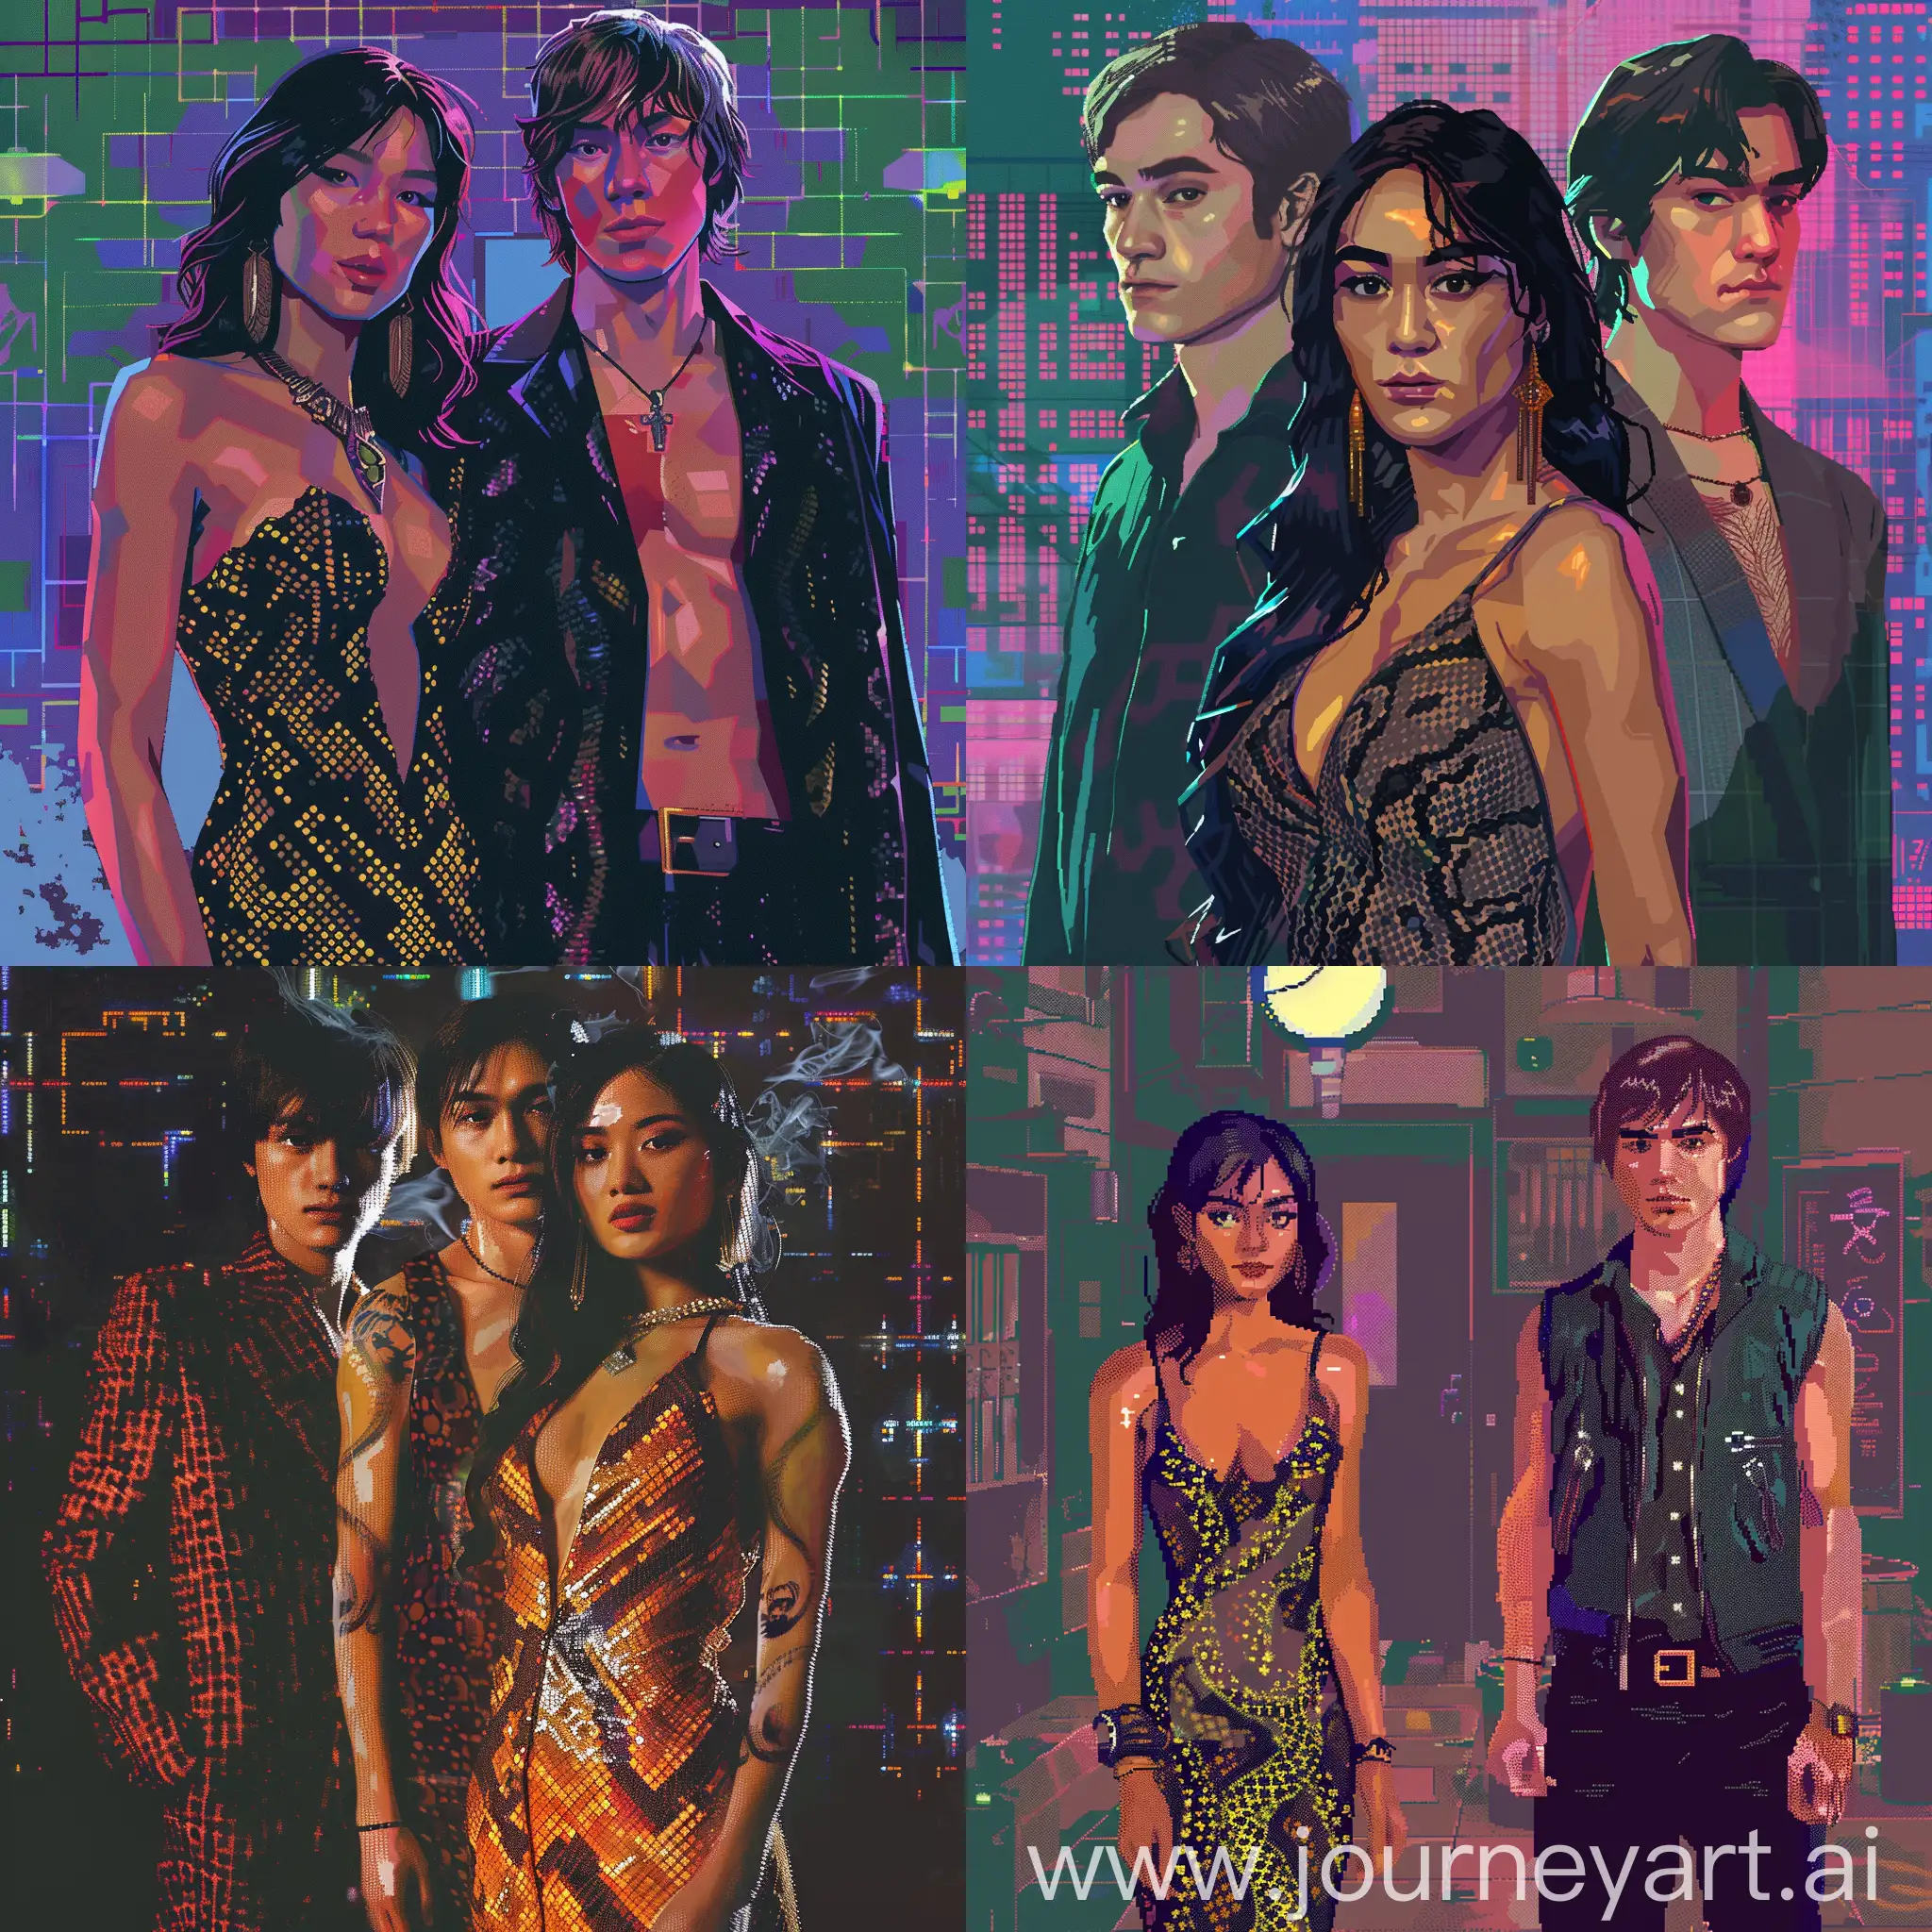 Synthwave-Nagini-Maledictus-and-Tom-Riddle-in-GTA-Vice-City-Style-Loading-Screen